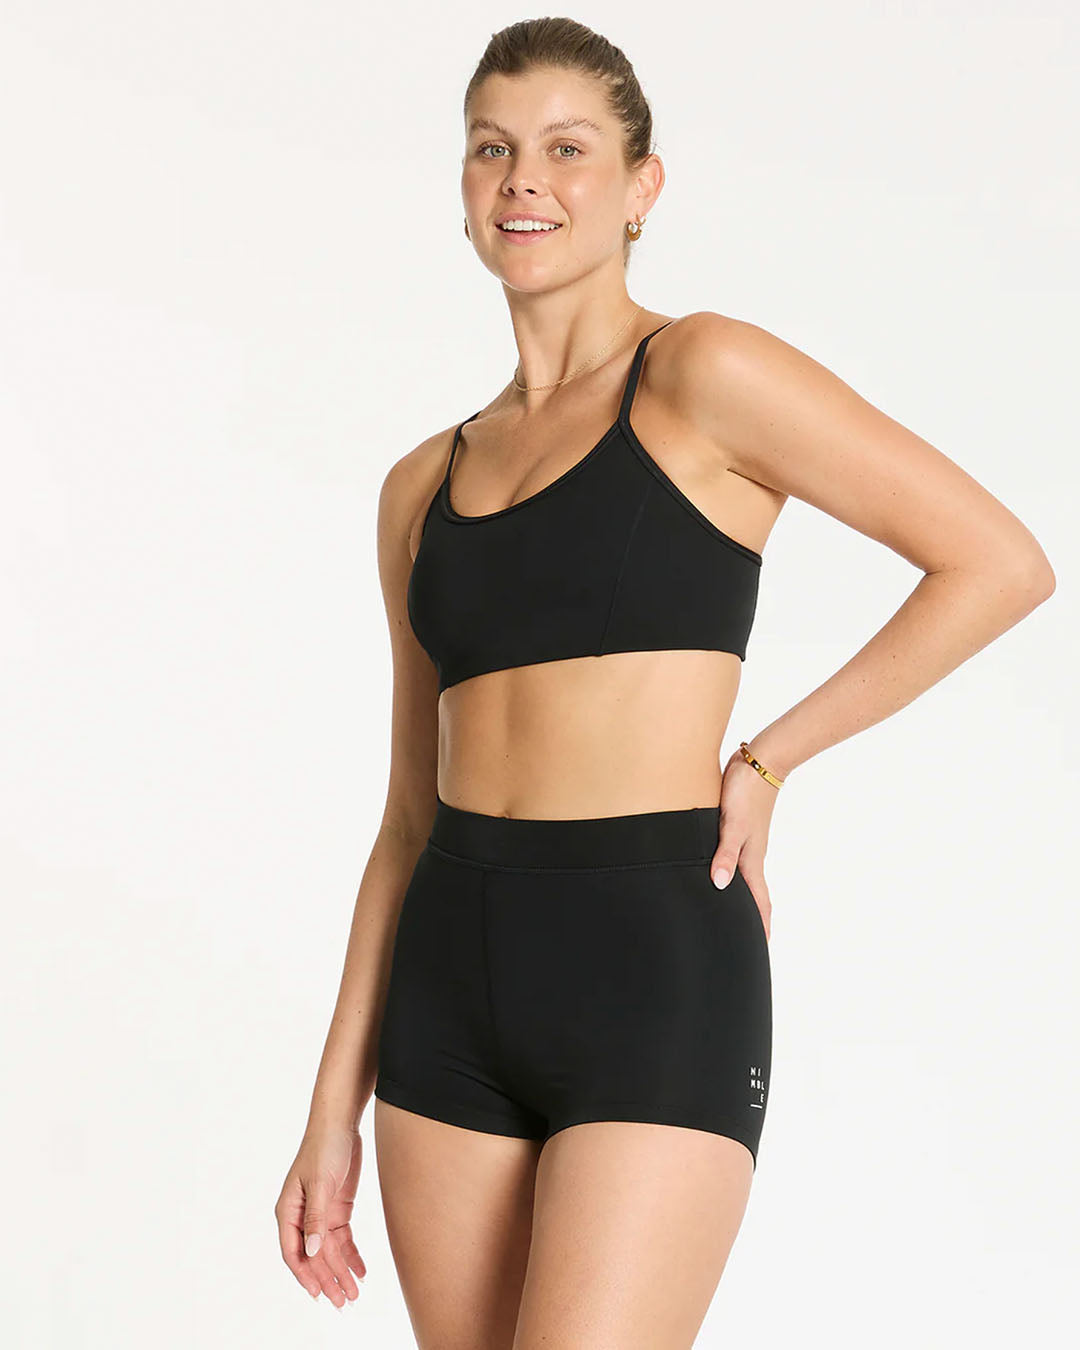 Nimble Activewear - A gentle hug for your tum and bum.